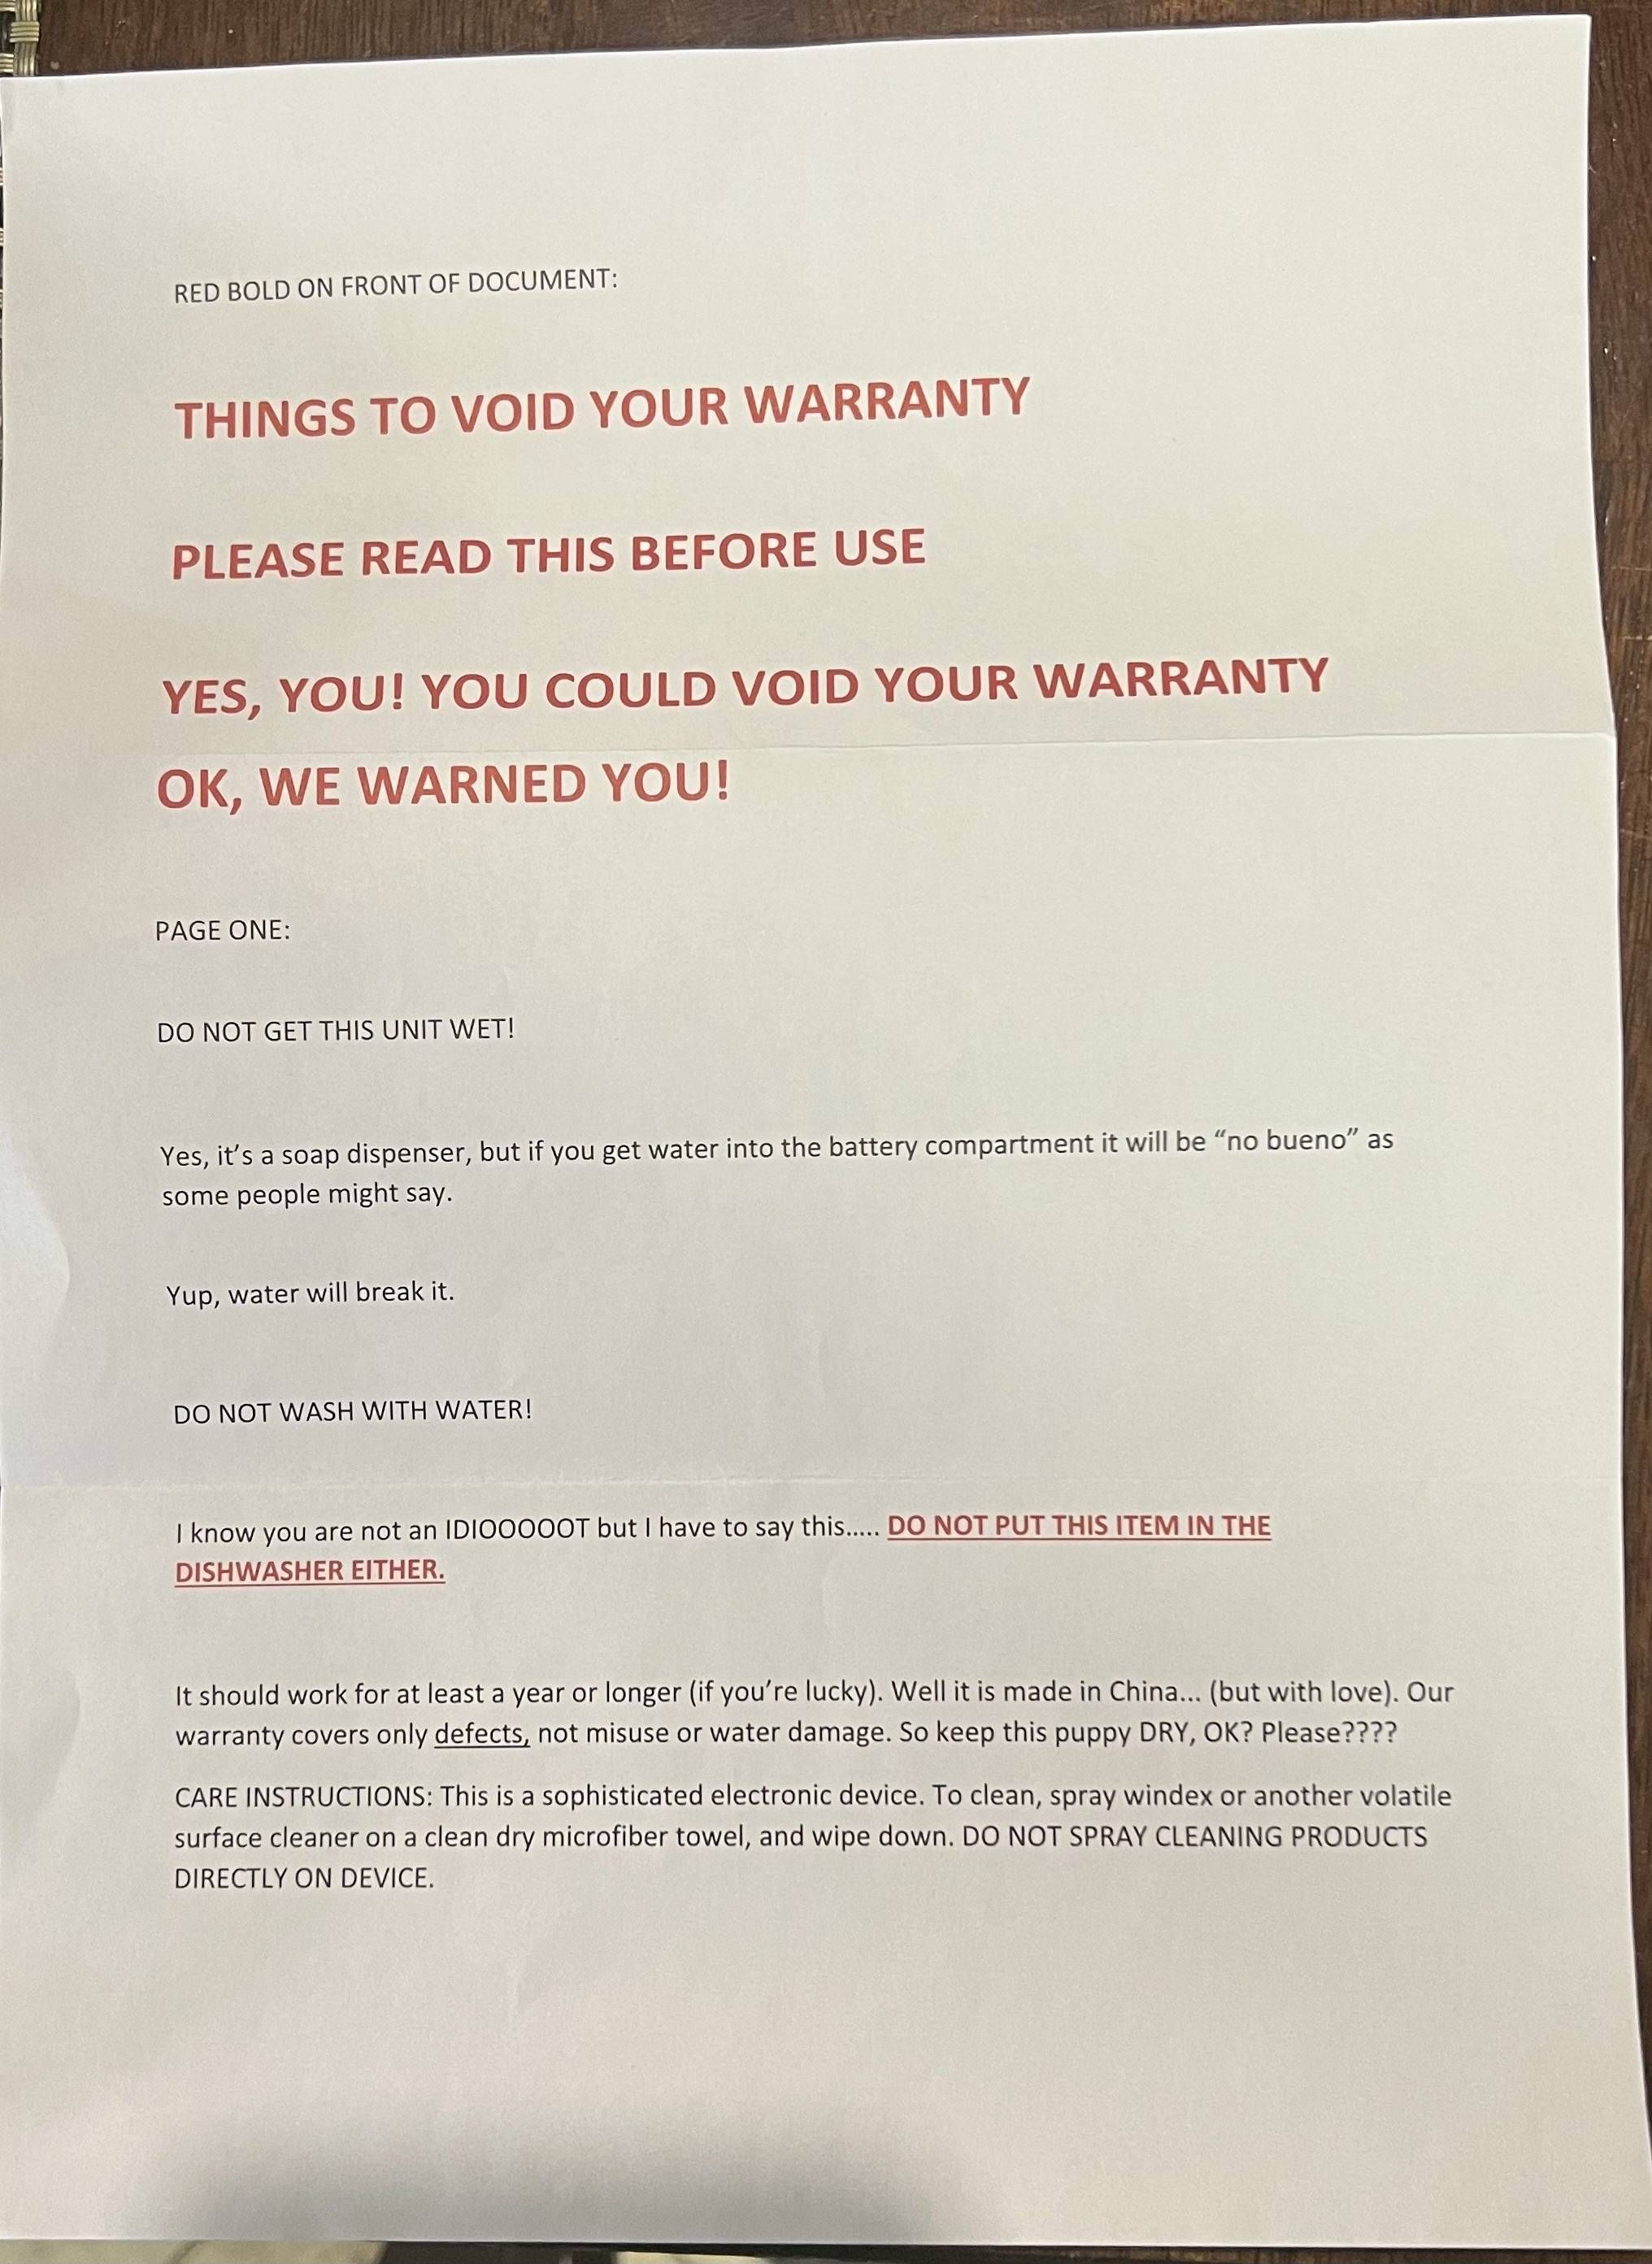 The warranty for my new soap dispenser.